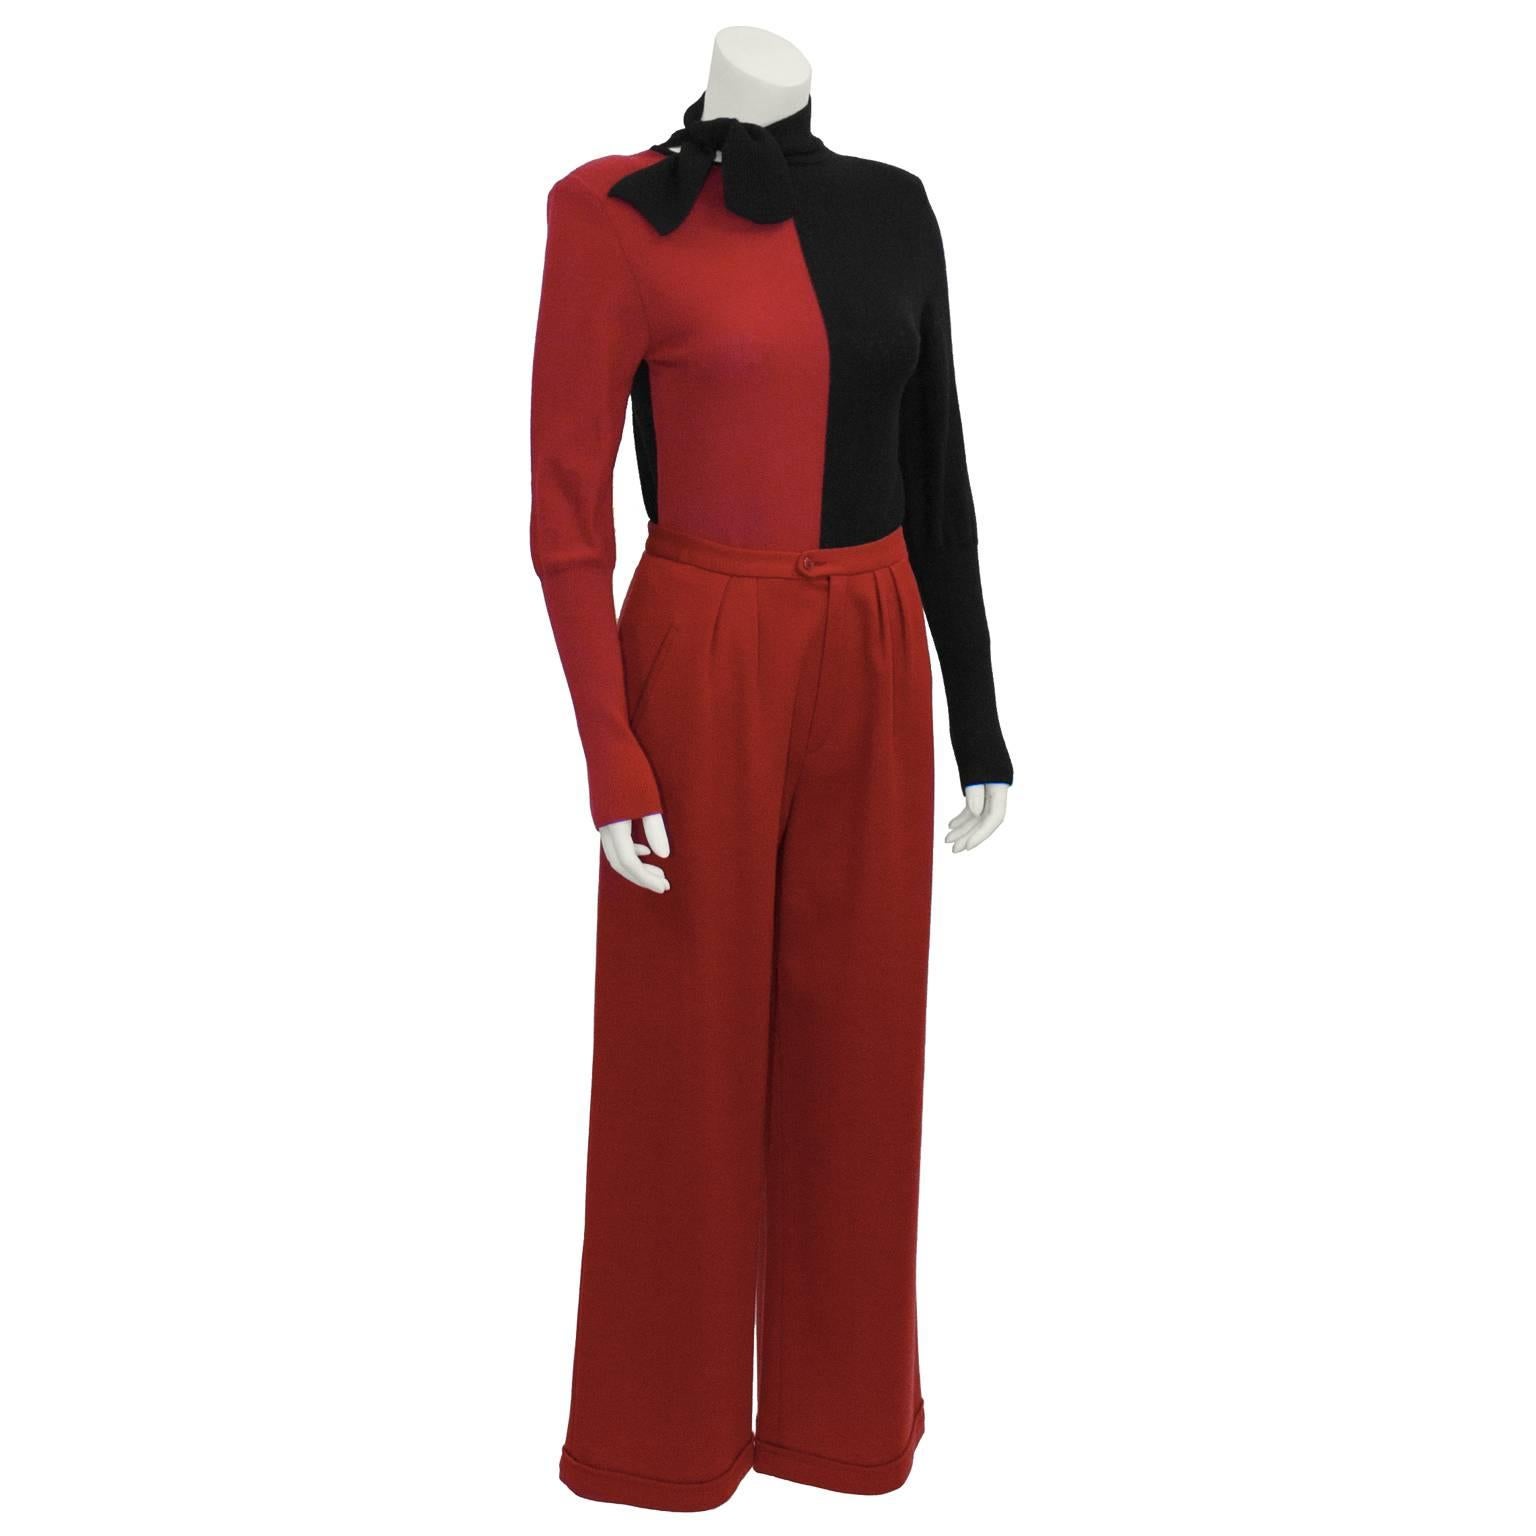 Make a fabulous statement with this Sonia Rykiel raspberry red and black knit ensemble from the 1980s. Color block red and black knit sweater has an off set petite necktie, and long sleeves ribbed to the elbow. Back side is all black. Brilliant